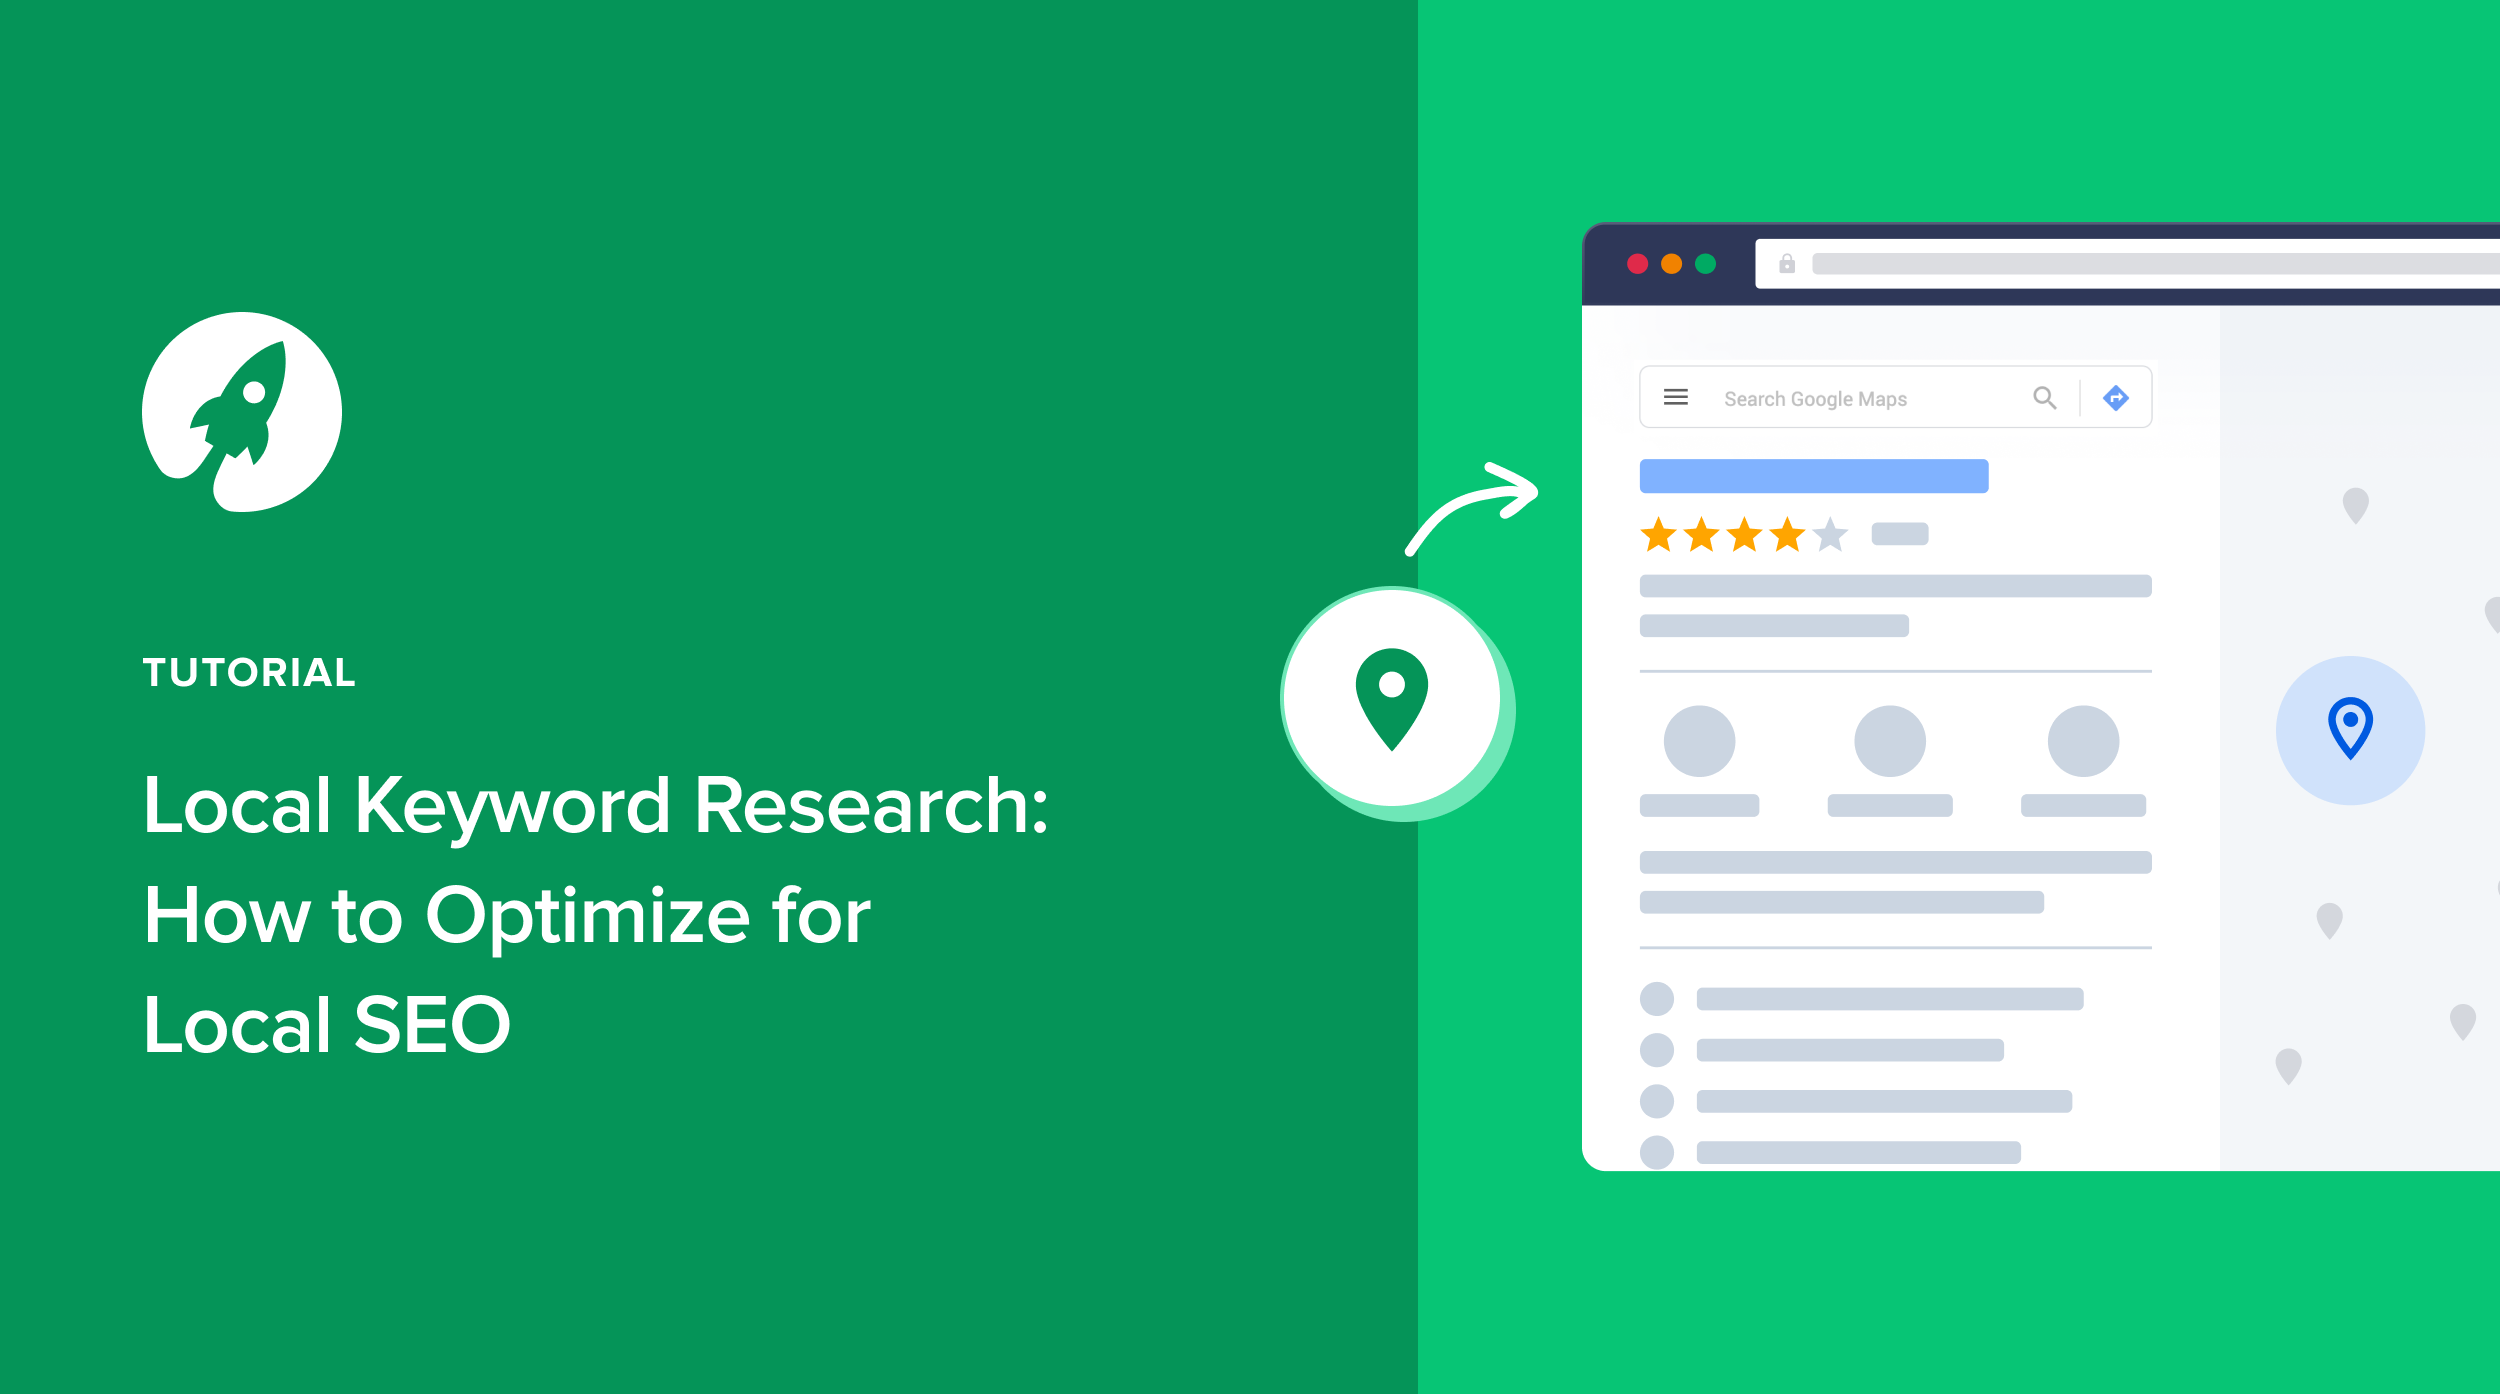 Local Keyword Research: How to Optimize for Local SEO